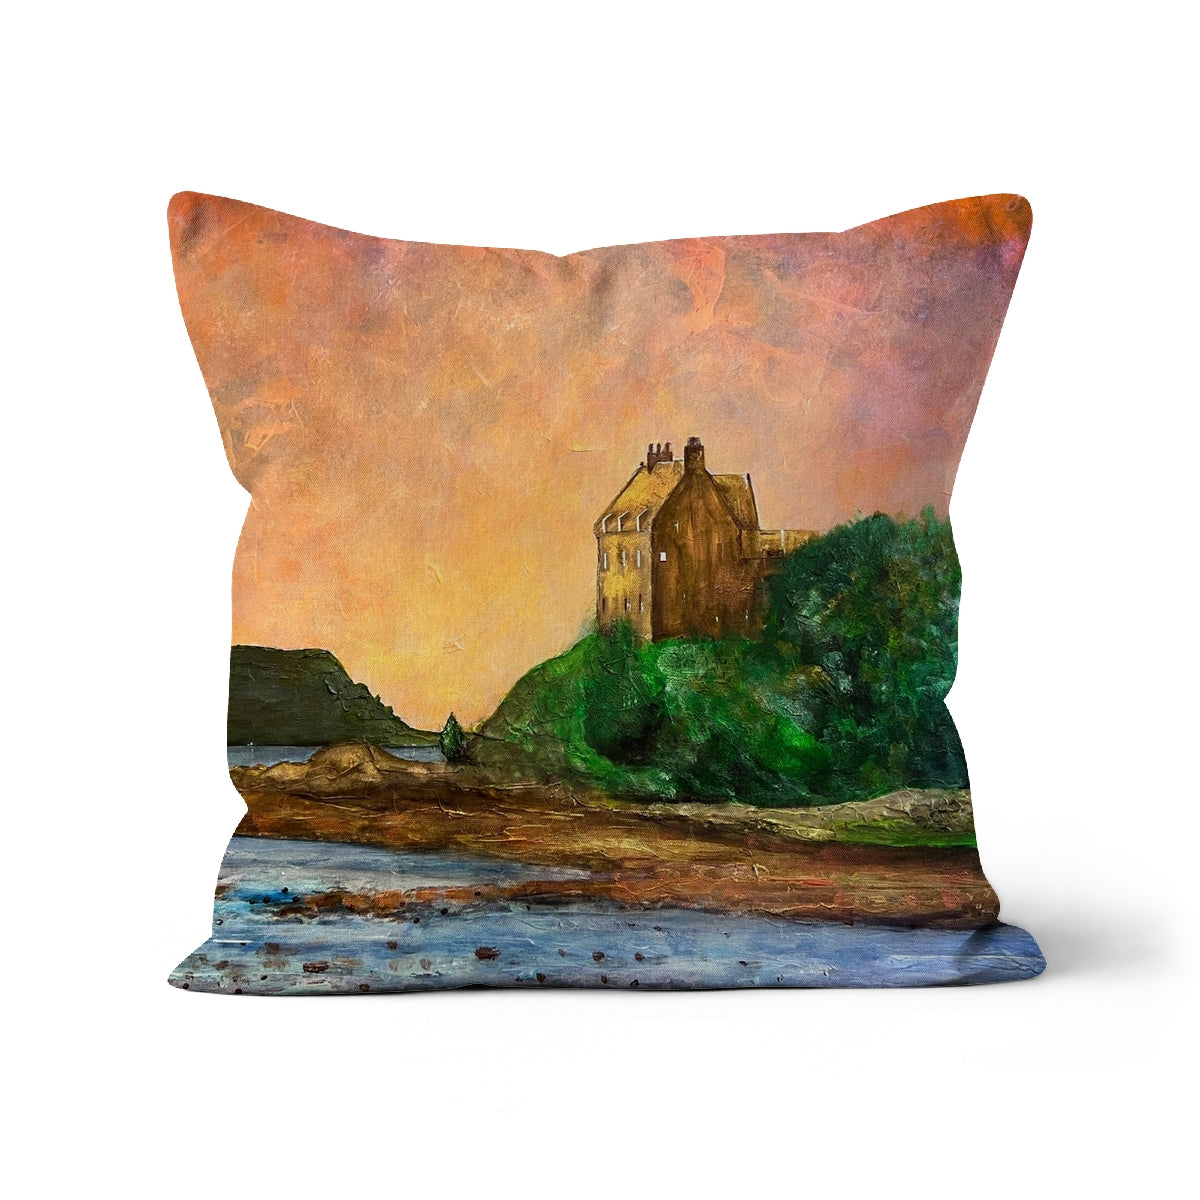 Duntrune Castle Art Gifts Cushion-Cushions-Historic & Iconic Scotland Art Gallery-Faux Suede-12"x12"-Paintings, Prints, Homeware, Art Gifts From Scotland By Scottish Artist Kevin Hunter